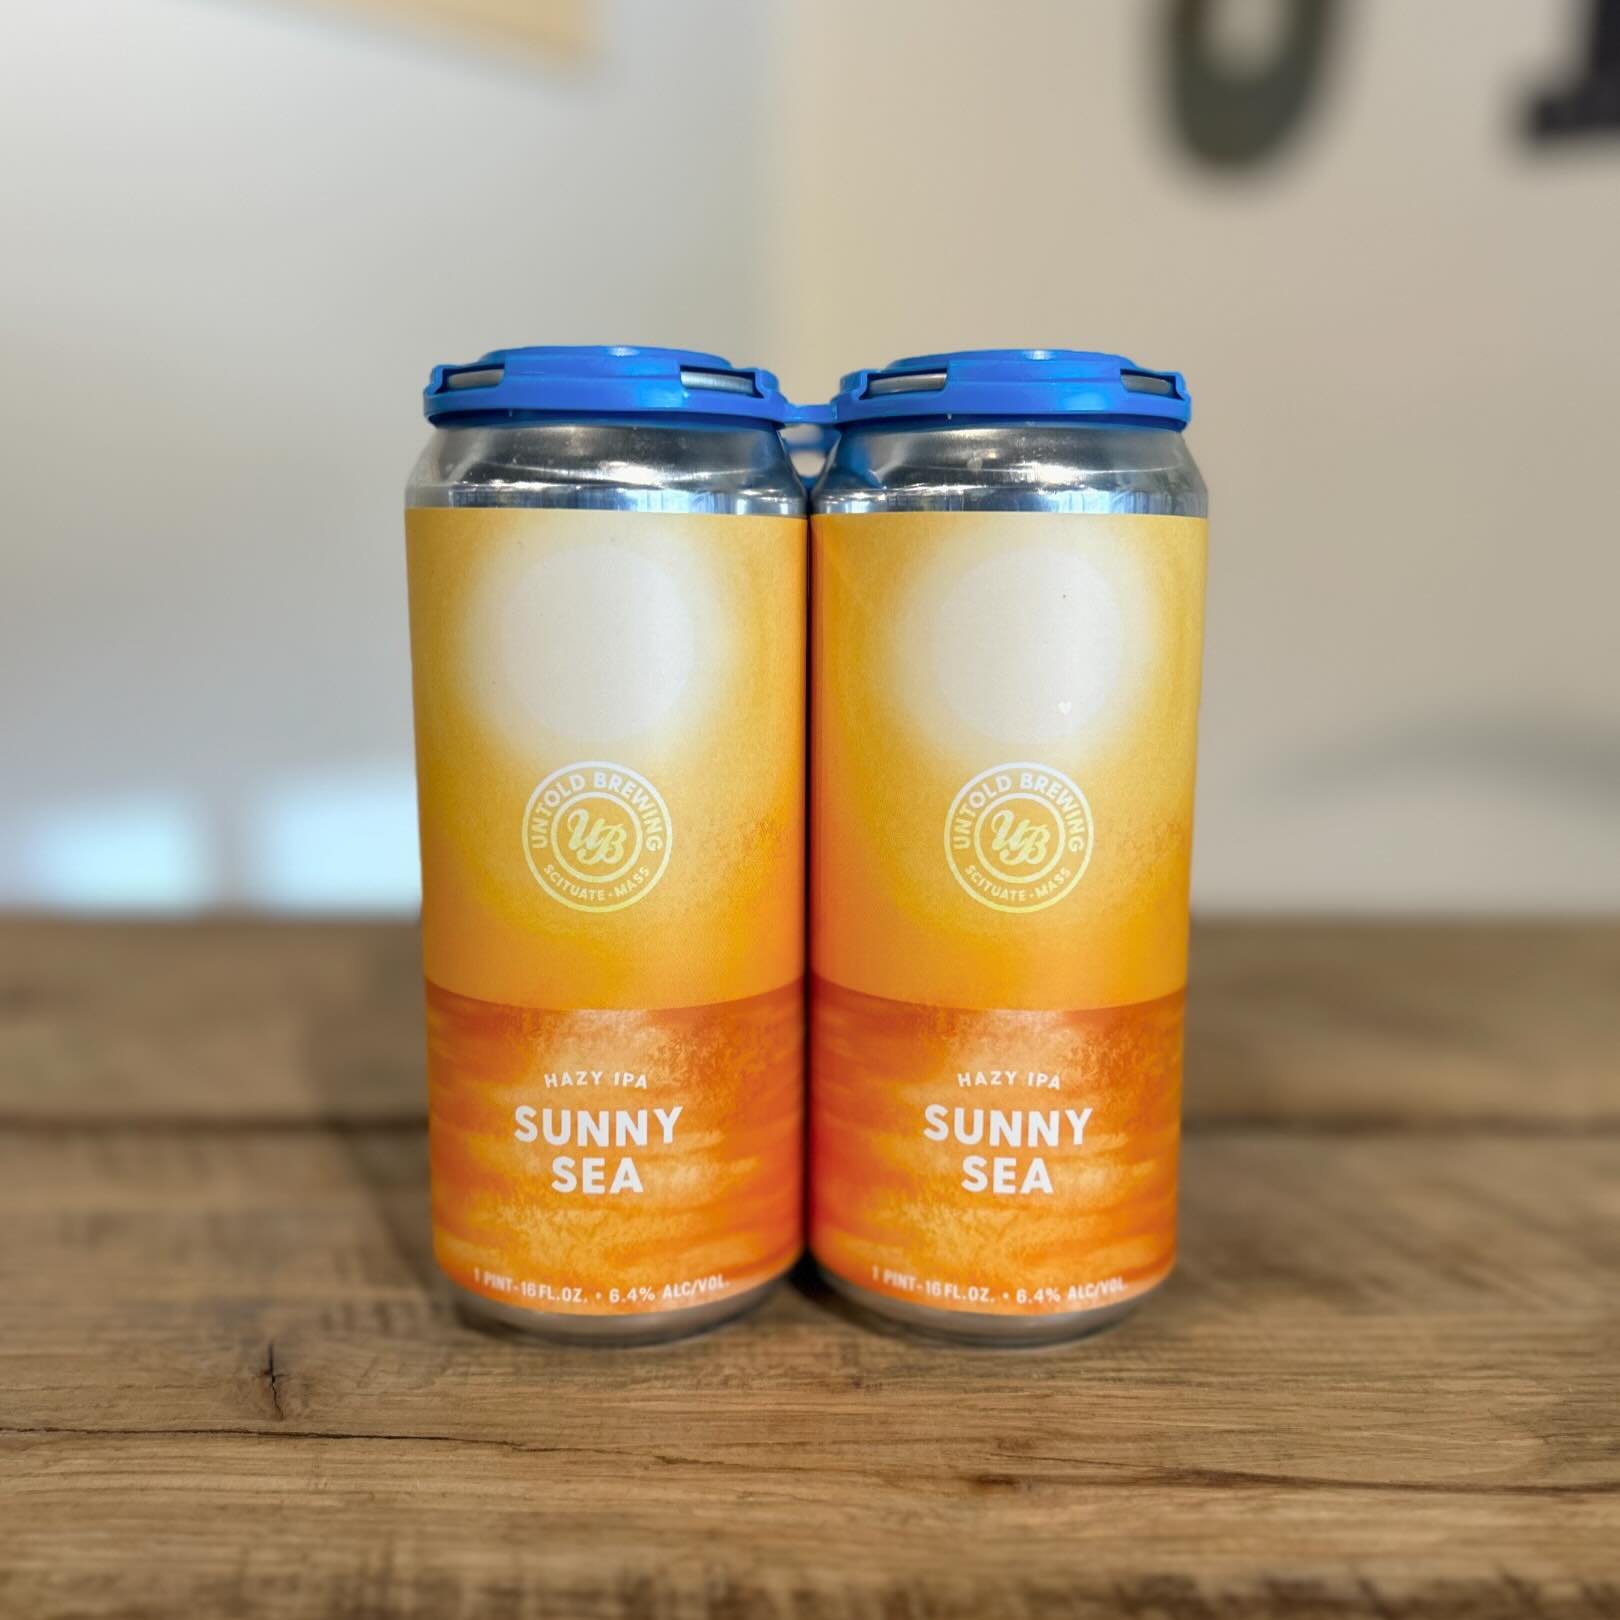 Fresh @untoldbrewing #NowAvailable #SudburyCraftBeer #DrinkLocal
&mdash;
Sunny Sea, our Summer flagship hazy IPA.

Perhaps it&rsquo;s the effervescent aromas of fresh-squeezed orange juice and tangerine, or maybe it&rsquo;s the plush, sweet body and 